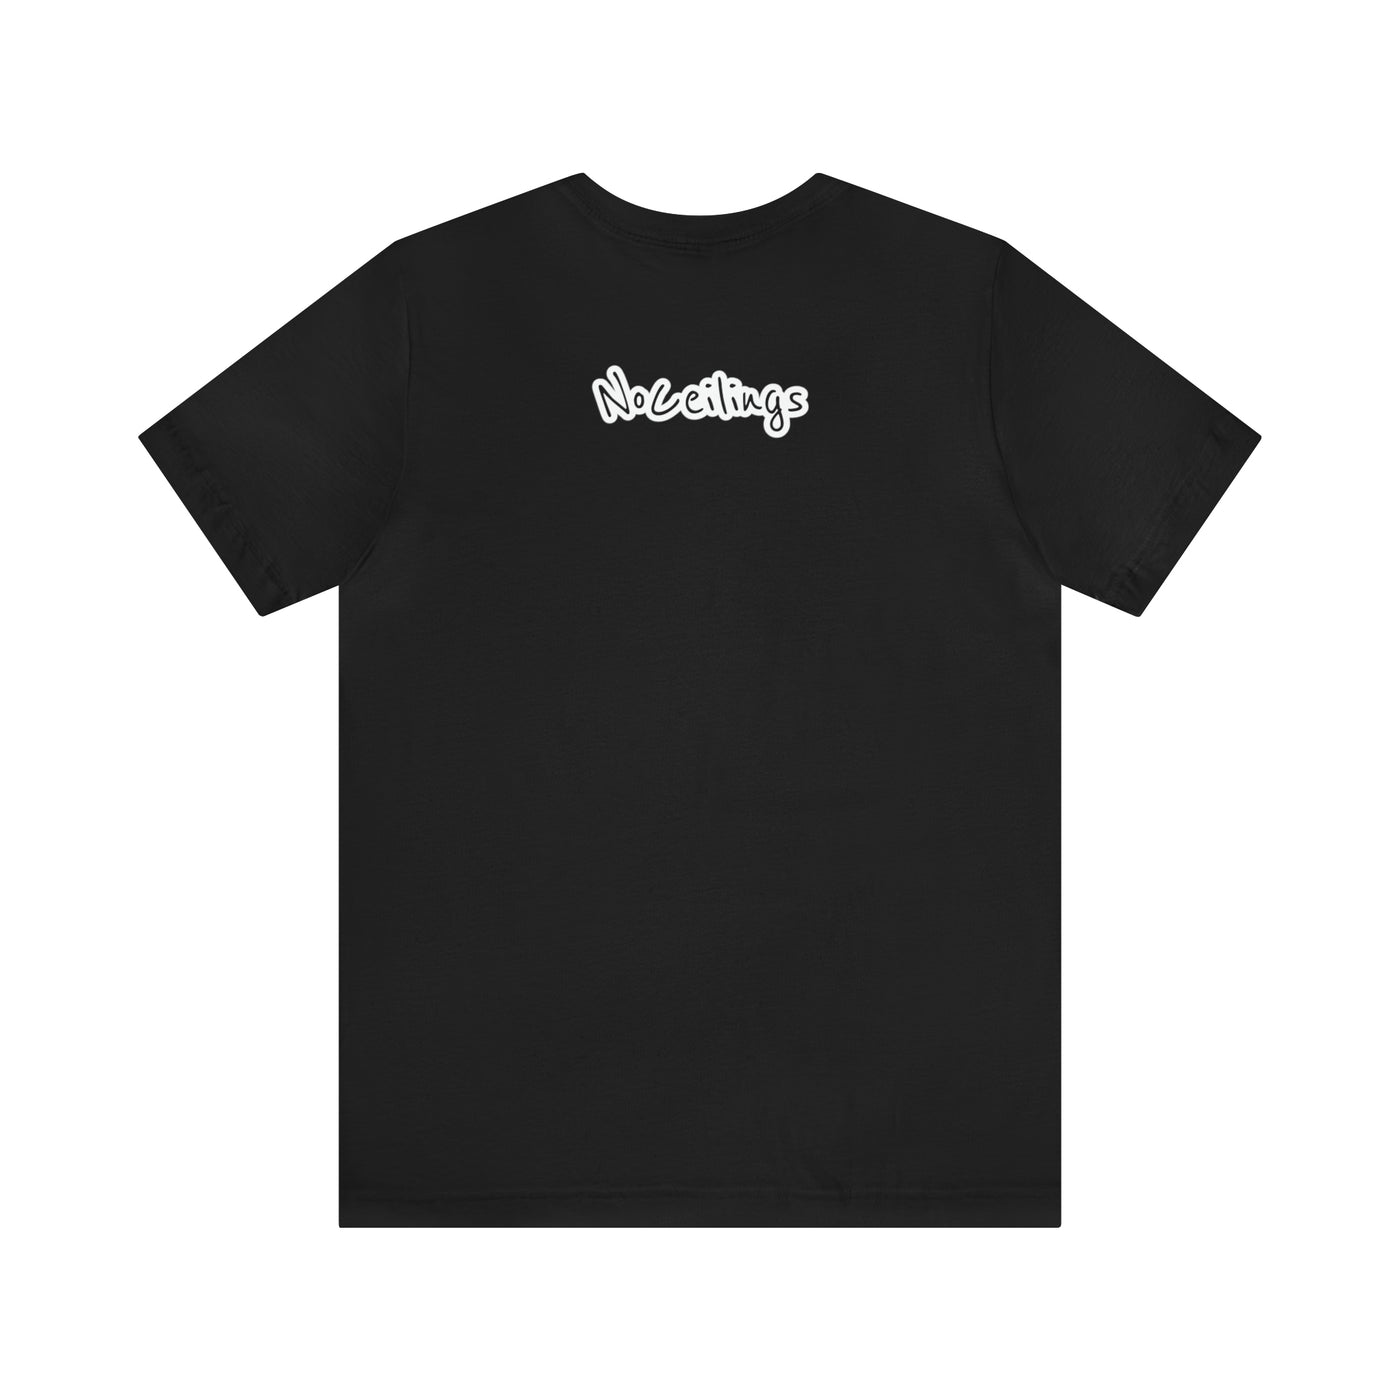 S/O to DC Unisex Jersey Short Sleeve Tee